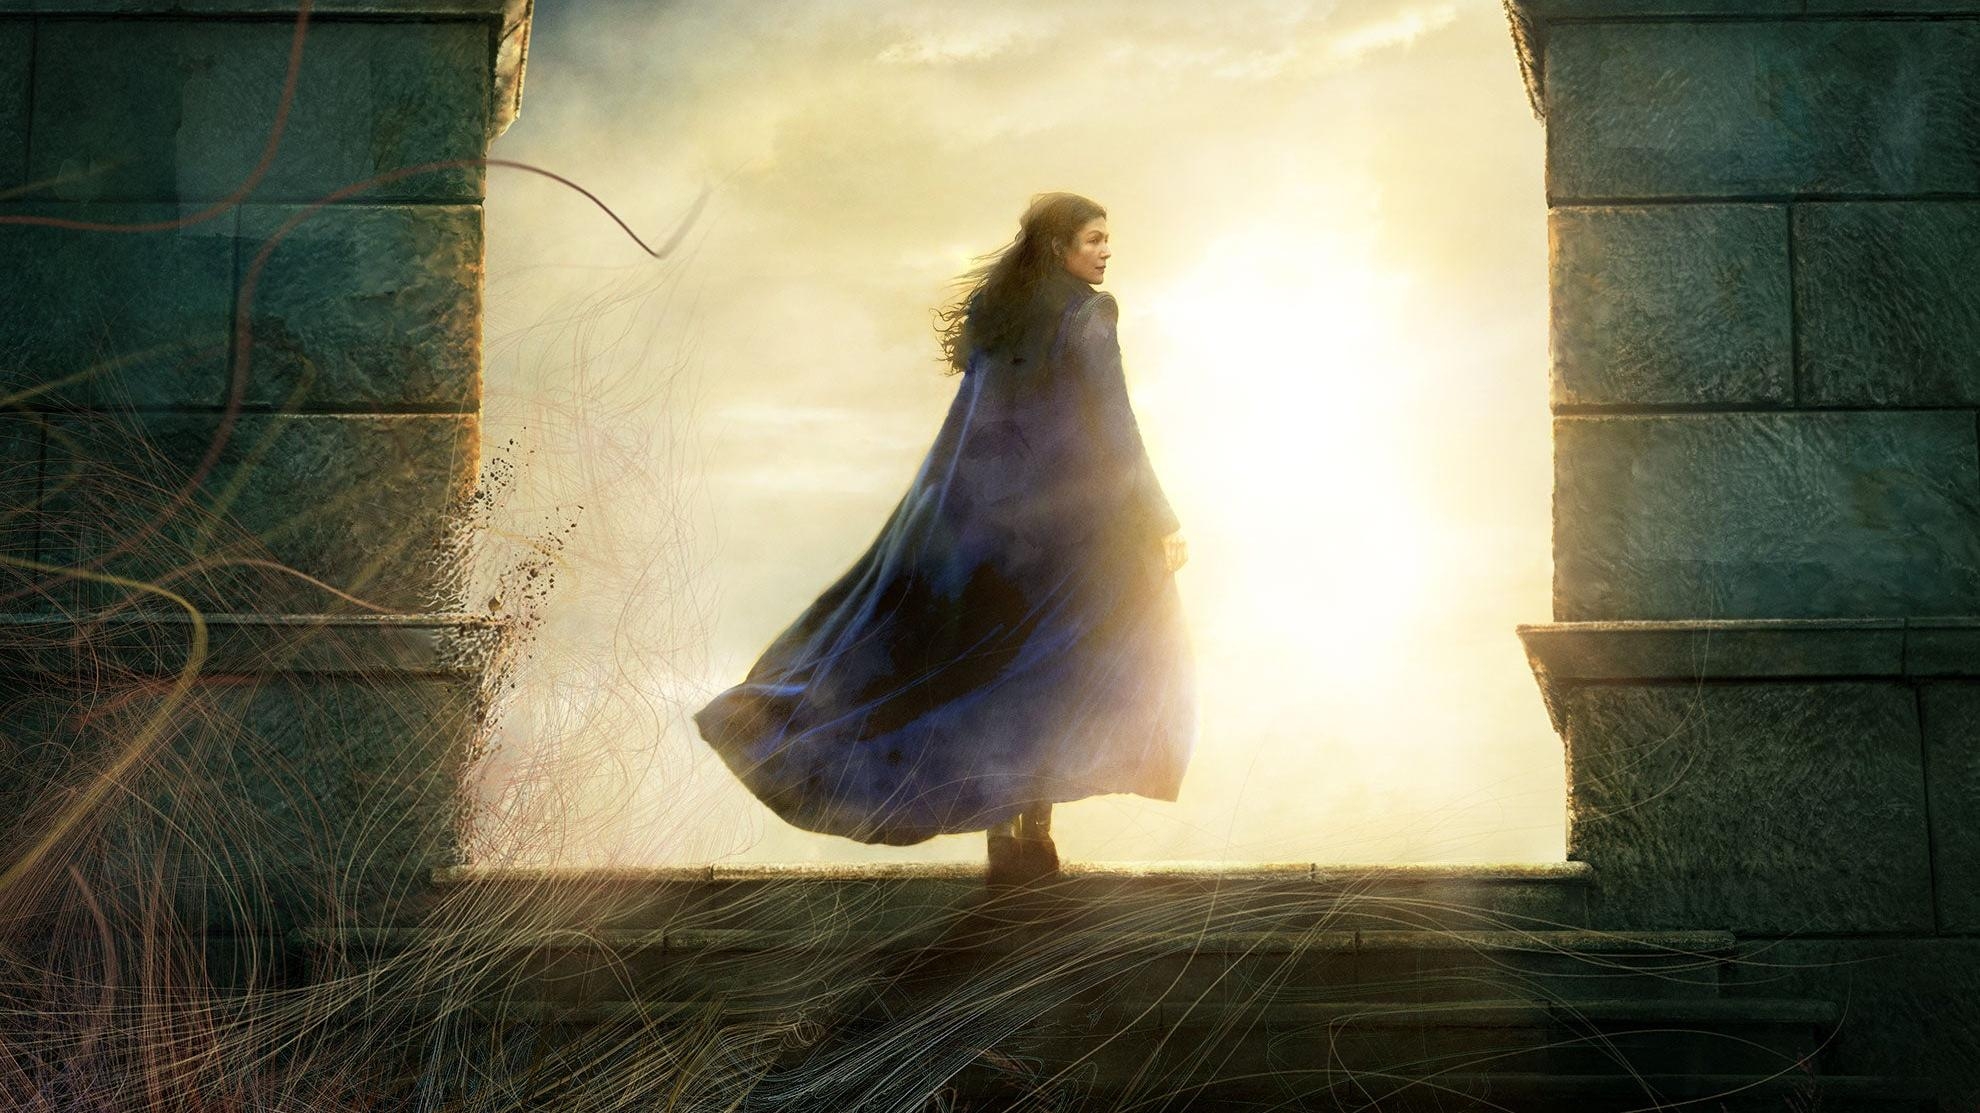 Amazon reveals teaser poster and release date for The Wheel Of Time series during Comic-Con